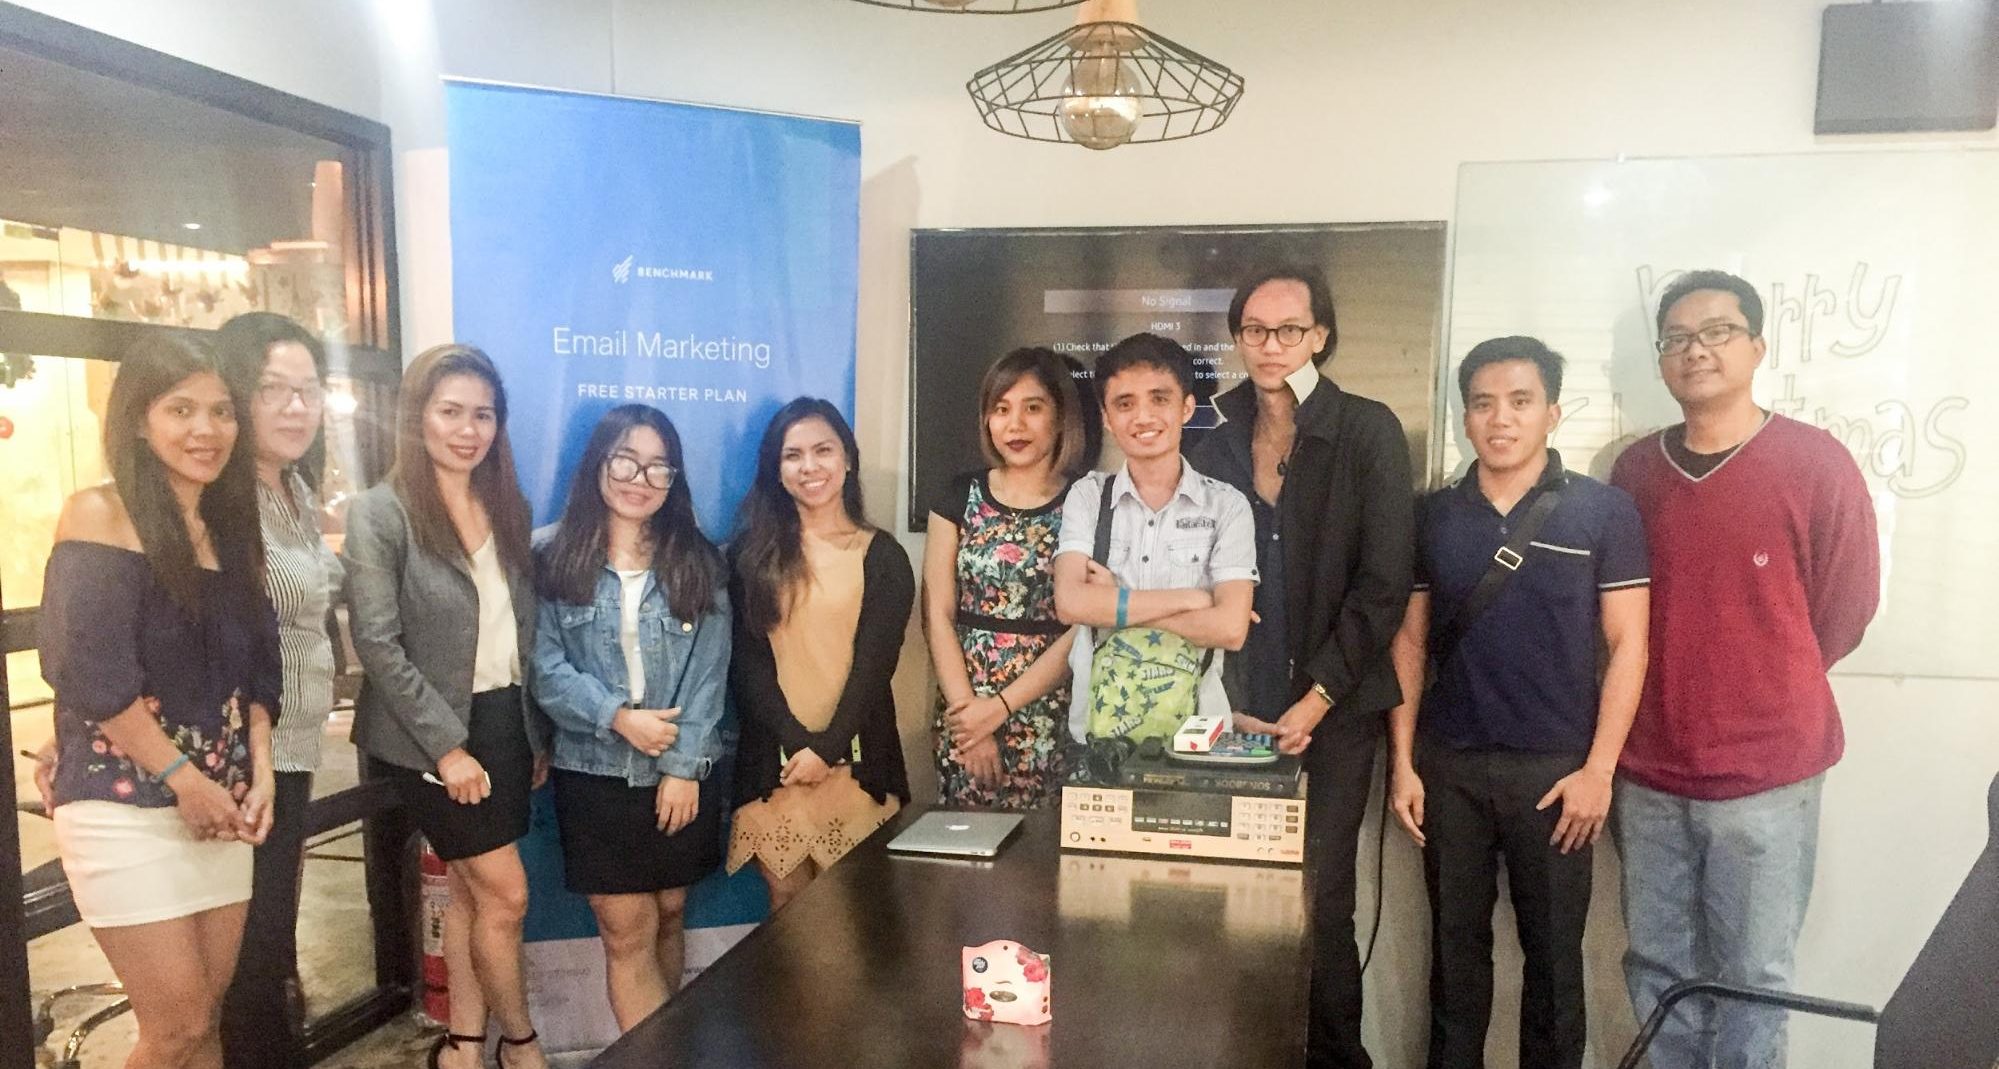 Free email marketing workshop in the Philippines